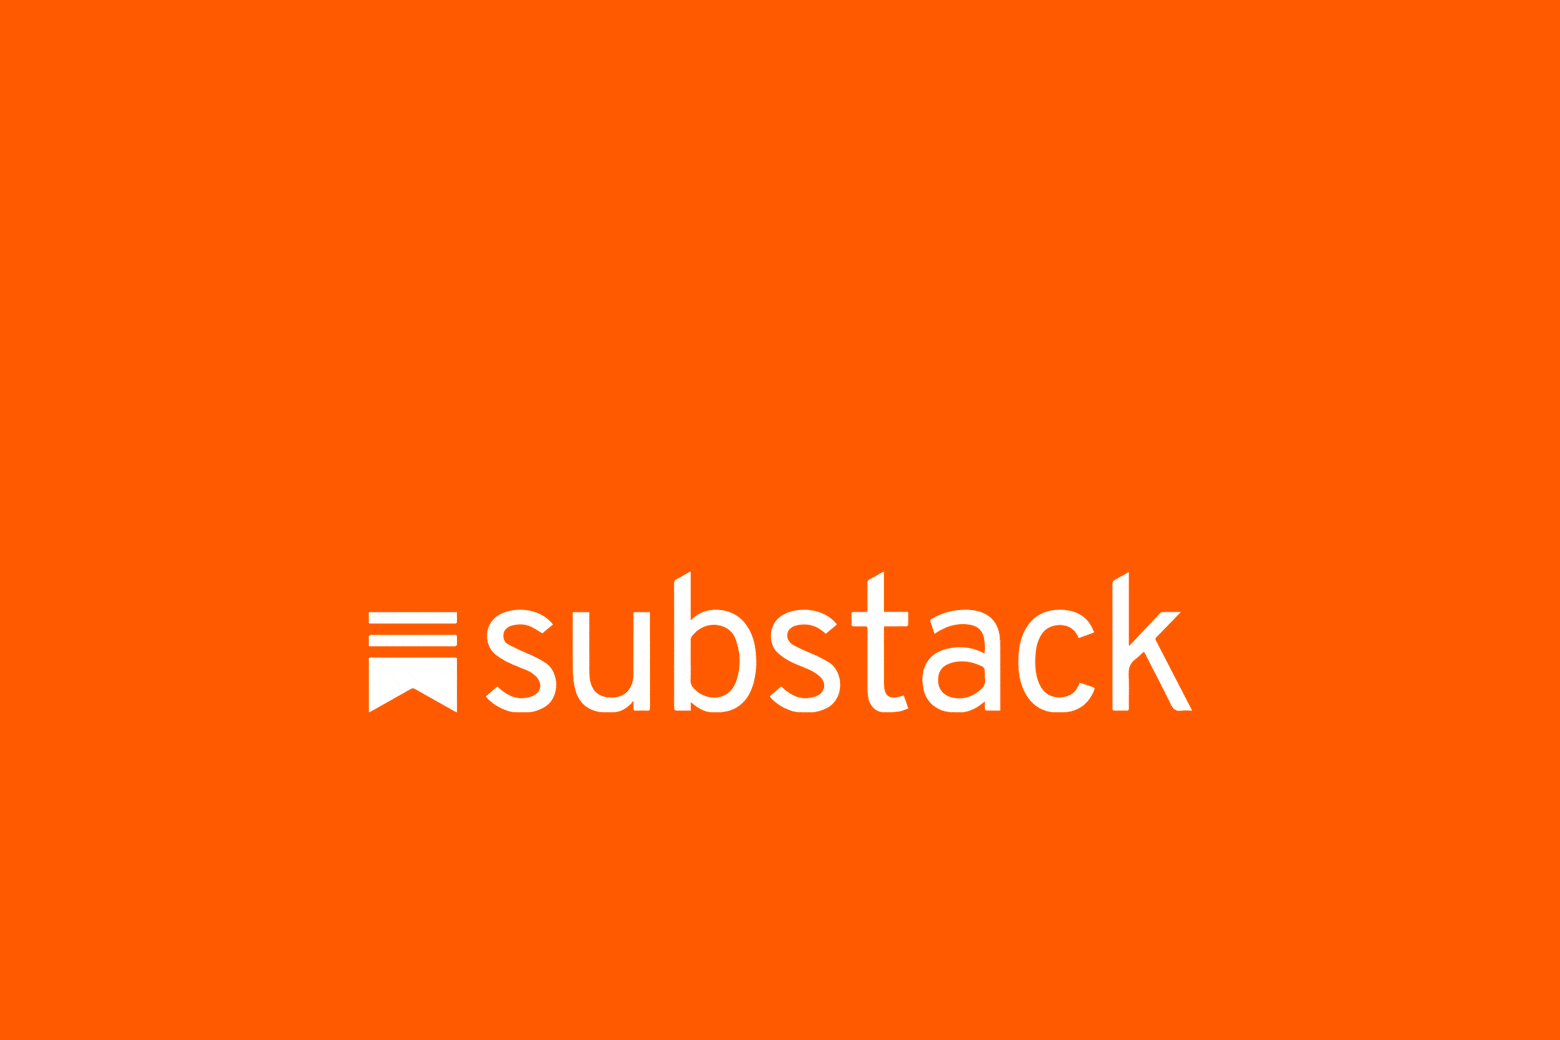 The Substack logo is teetering and then falls apart.